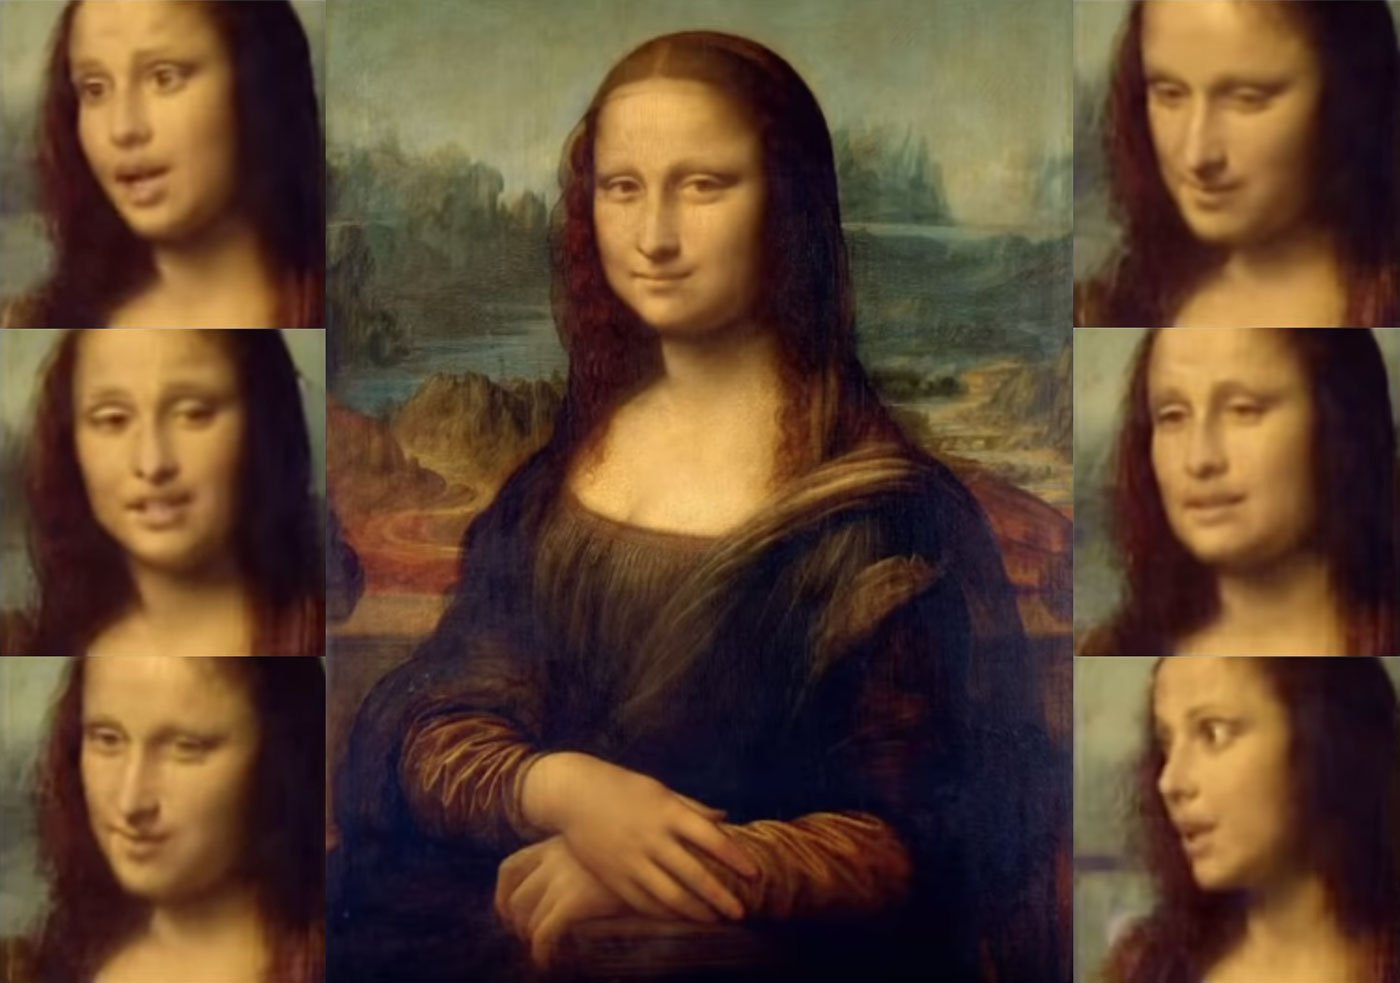 Monalishasexvideo - Russian Researchers Used AI to Bring the Mona Lisa to Life and It Freaked  Everyone Out. See the Video Here